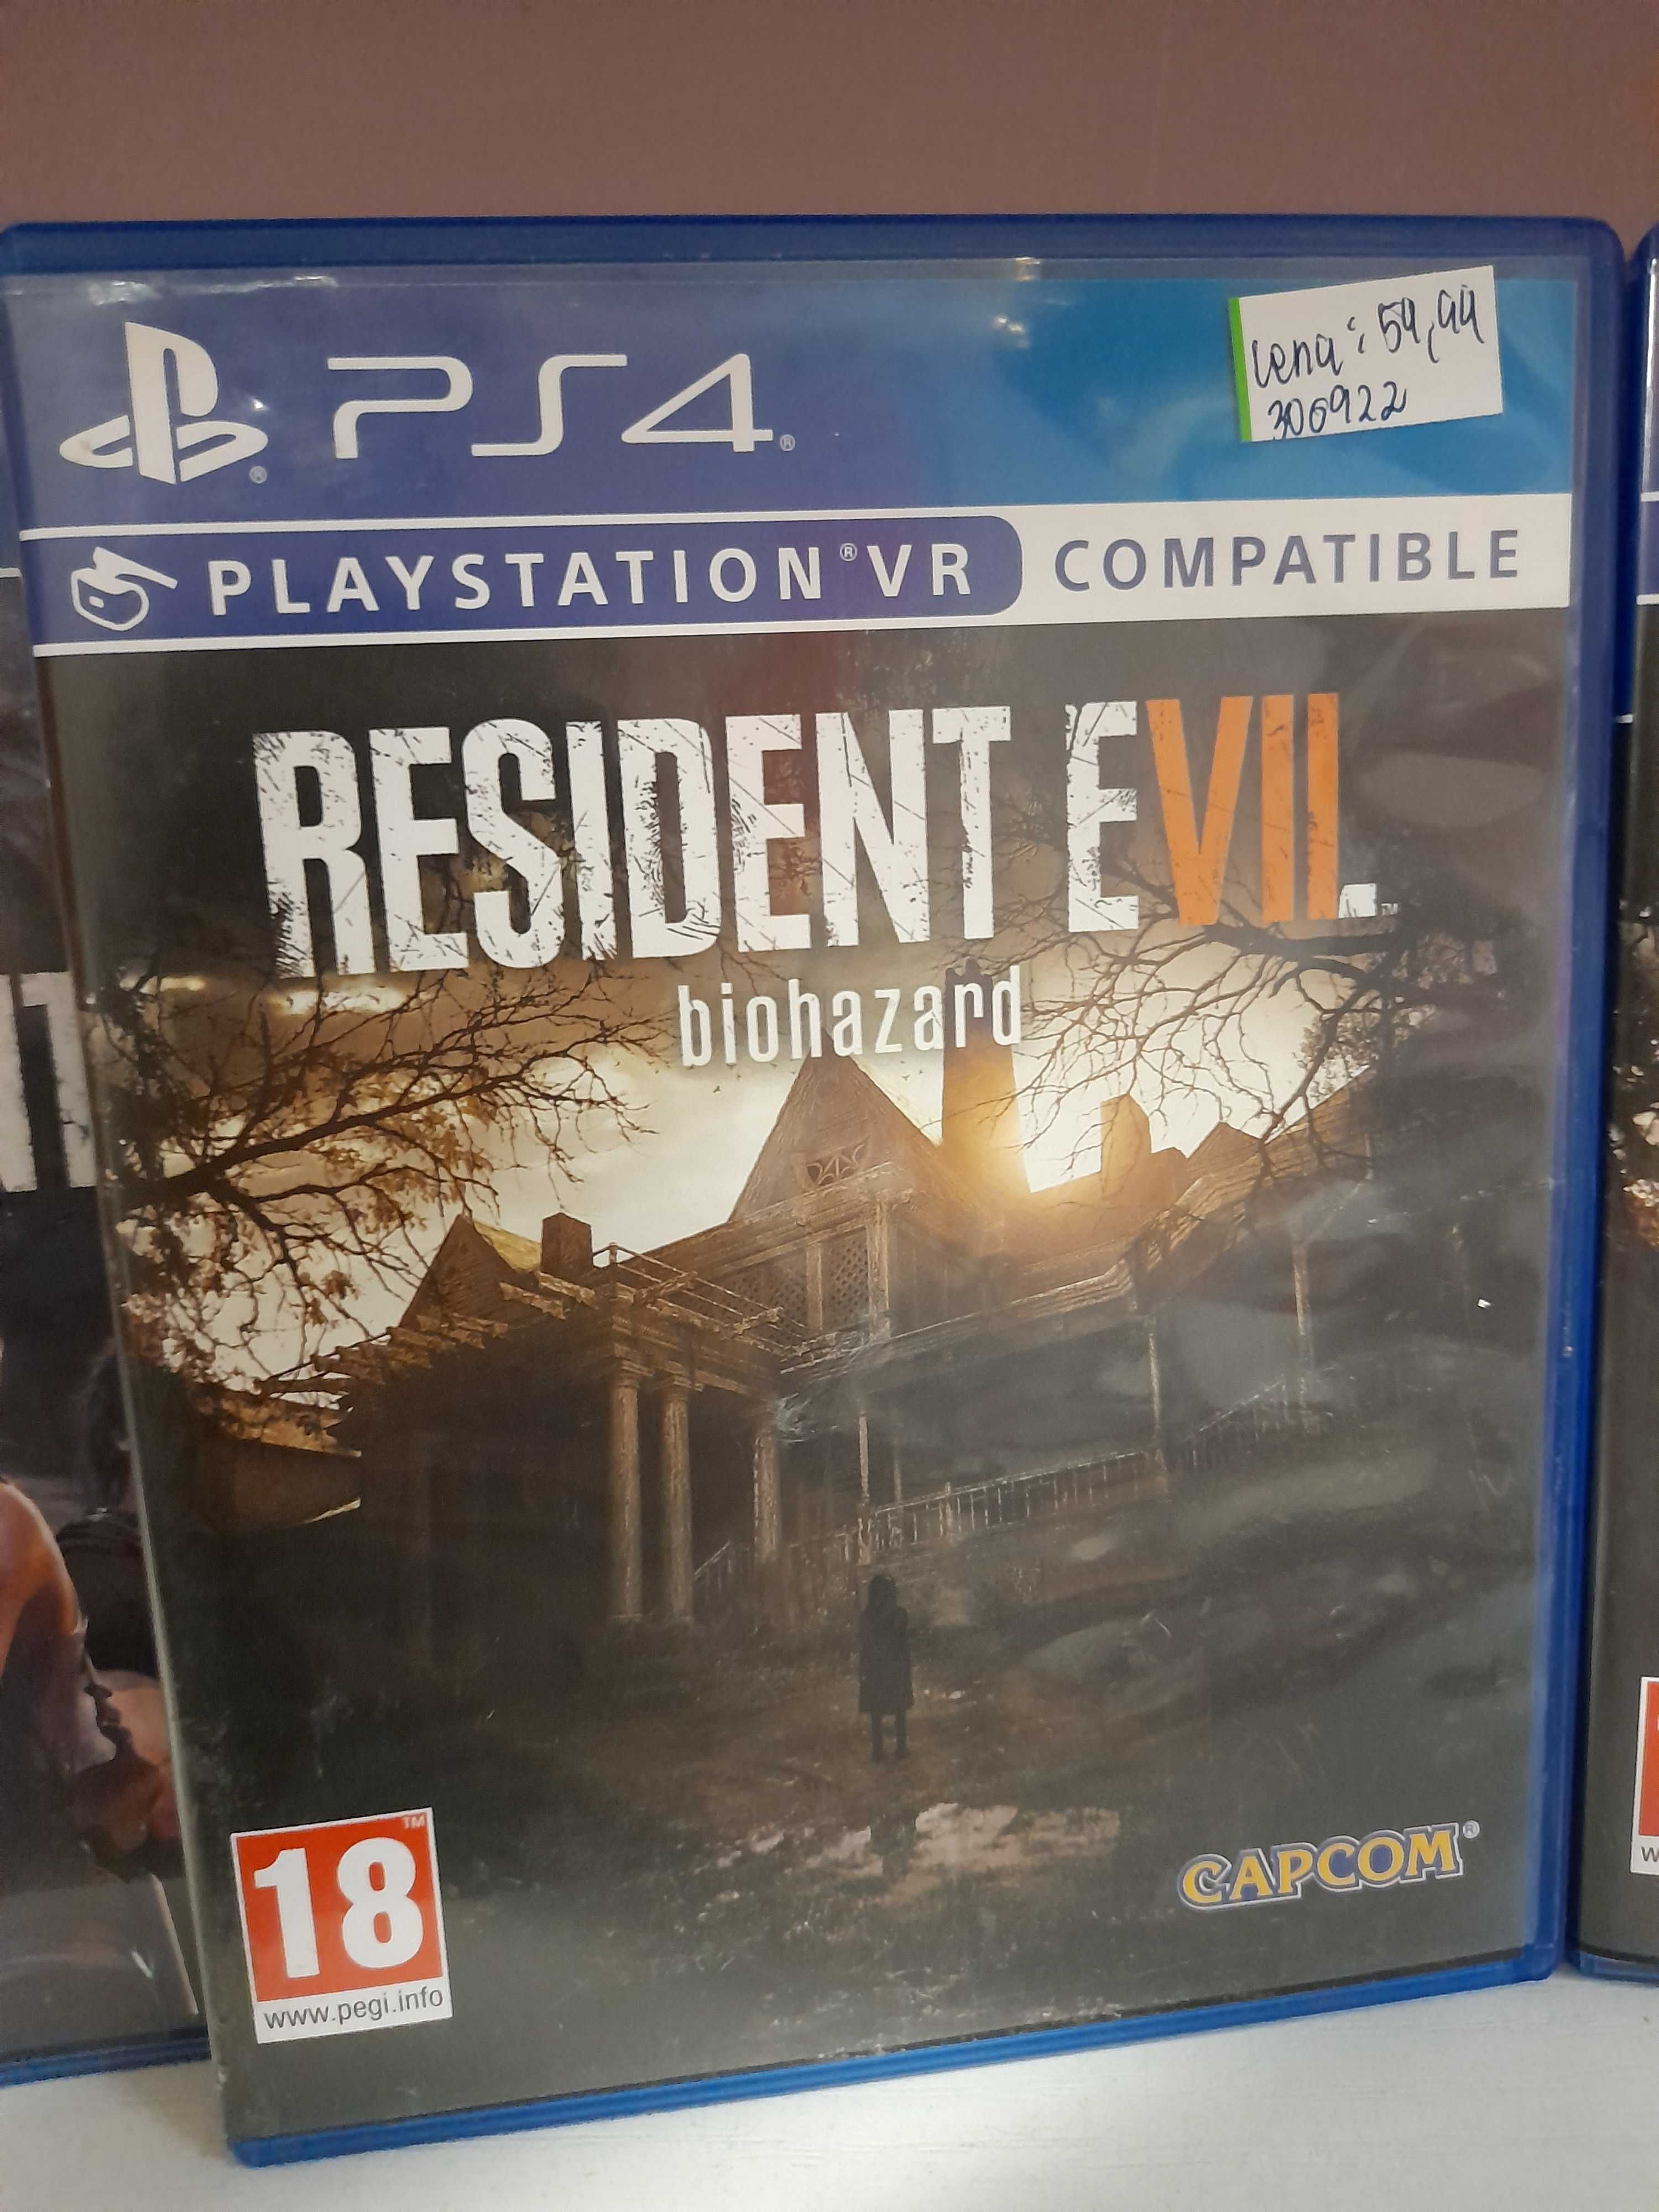 Resident evil 3 ps4, biohazard ps4, revelations 2 ps4, sklep Tychy